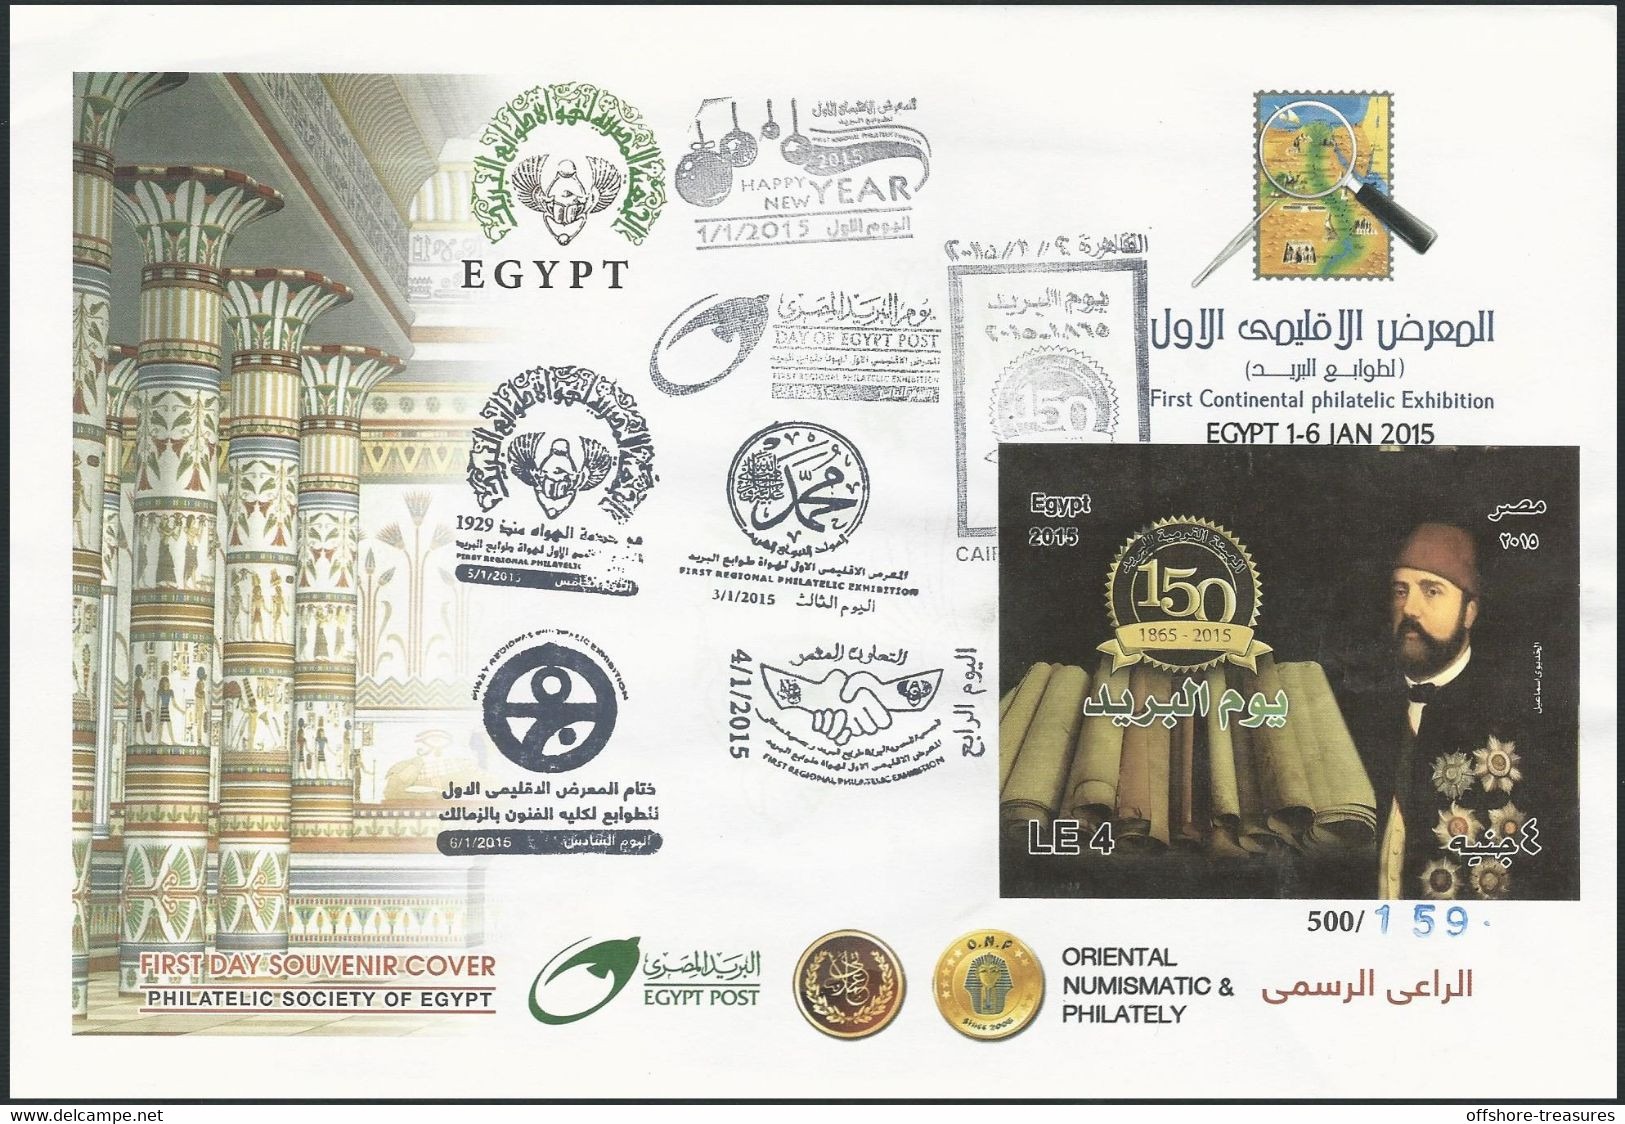 EGYPT 2015 POST DAY 2 FDC / FIRST DAY COVER Limited Edition Certified - ALL POSTAL EXHIBITION 6 DAYS Cachets 159/500 - Brieven En Documenten